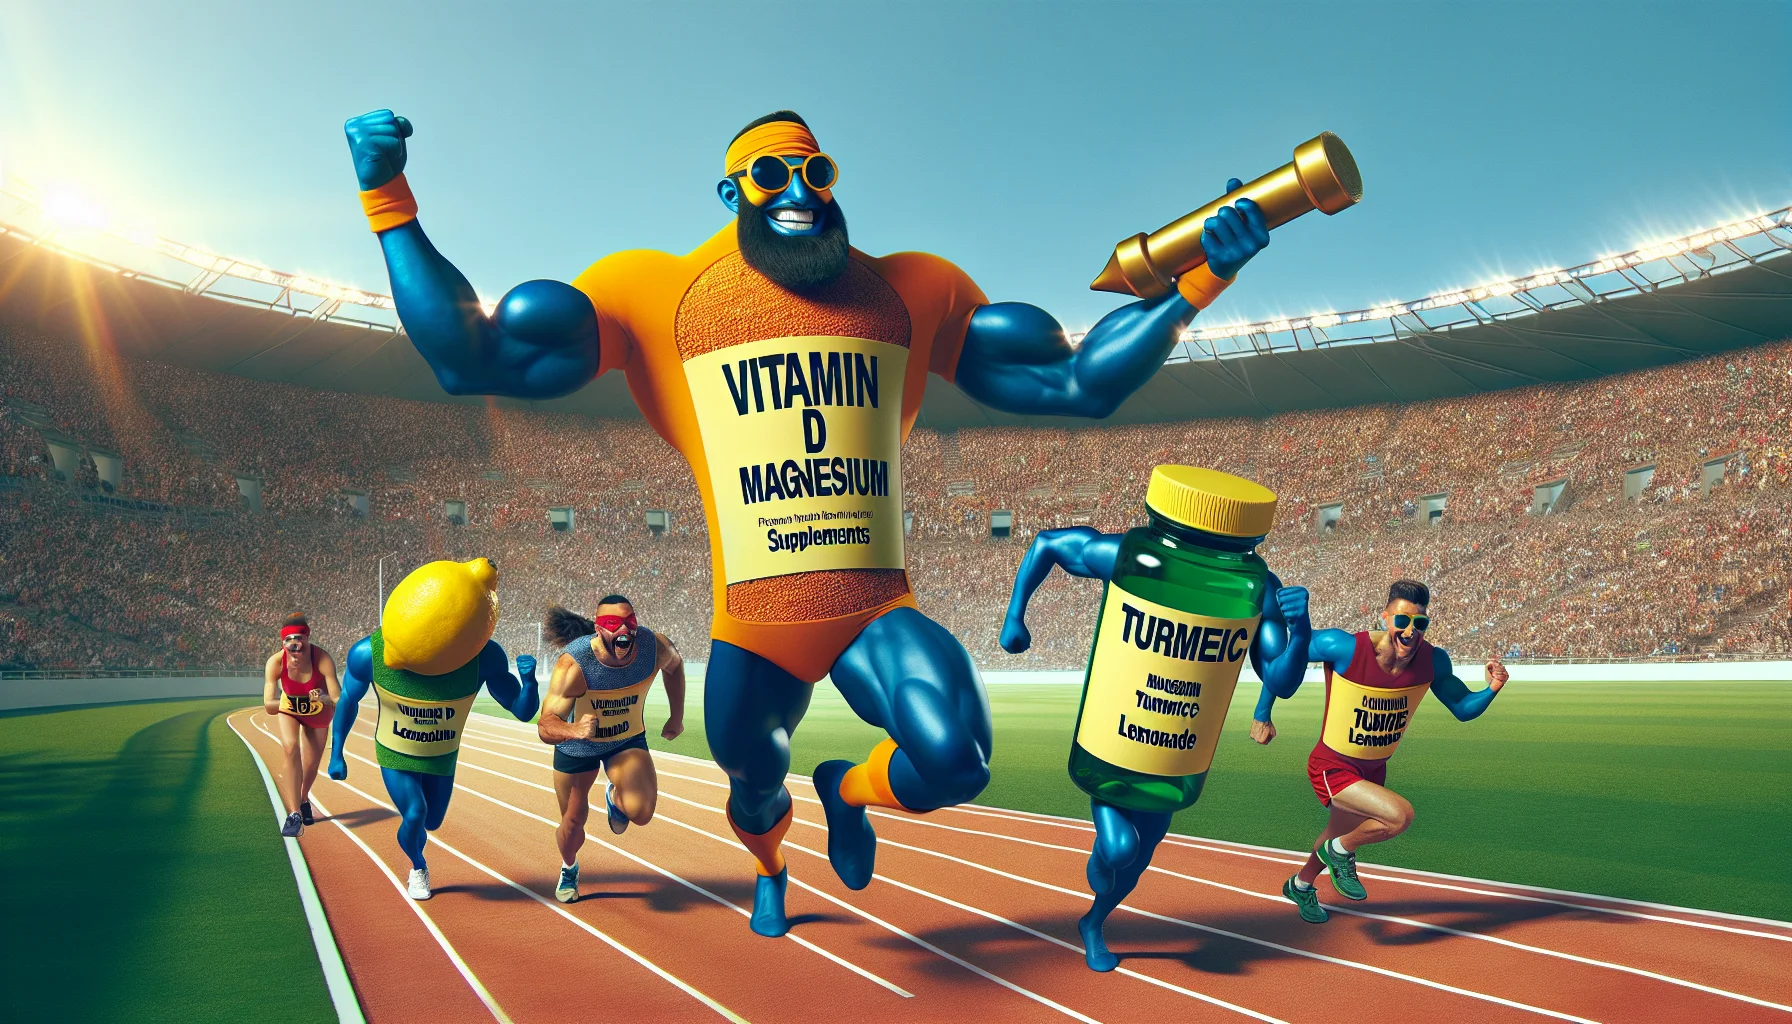 Create a humorous, realistic scene with the theme of promoting sports supplements. In this image, the key aspects include a creative depiction of 'Vitamin D Magnesium Turmeric Lemonade'. It could envision a mid-action scene where fitness enthusiasts are participating in an outdoor race. It's no ordinary race, though. The competitors are not humans, but rather giant embodies of 'Vitamin D', 'Magnesium', 'Turmeric', and 'Lemon'. They're humorously depicted like cartoonish superheroes, each radiating with the power of their respective supplements, and engaging in some amusing antics. The backdrop is a sunny outdoor sports stadium packed with cheering, diverse supporters of various descents and gender which further adds to the upbeat, fun vibe of the scenario. This playful metaphor makes the concept of using sports supplements exciting and appealing.